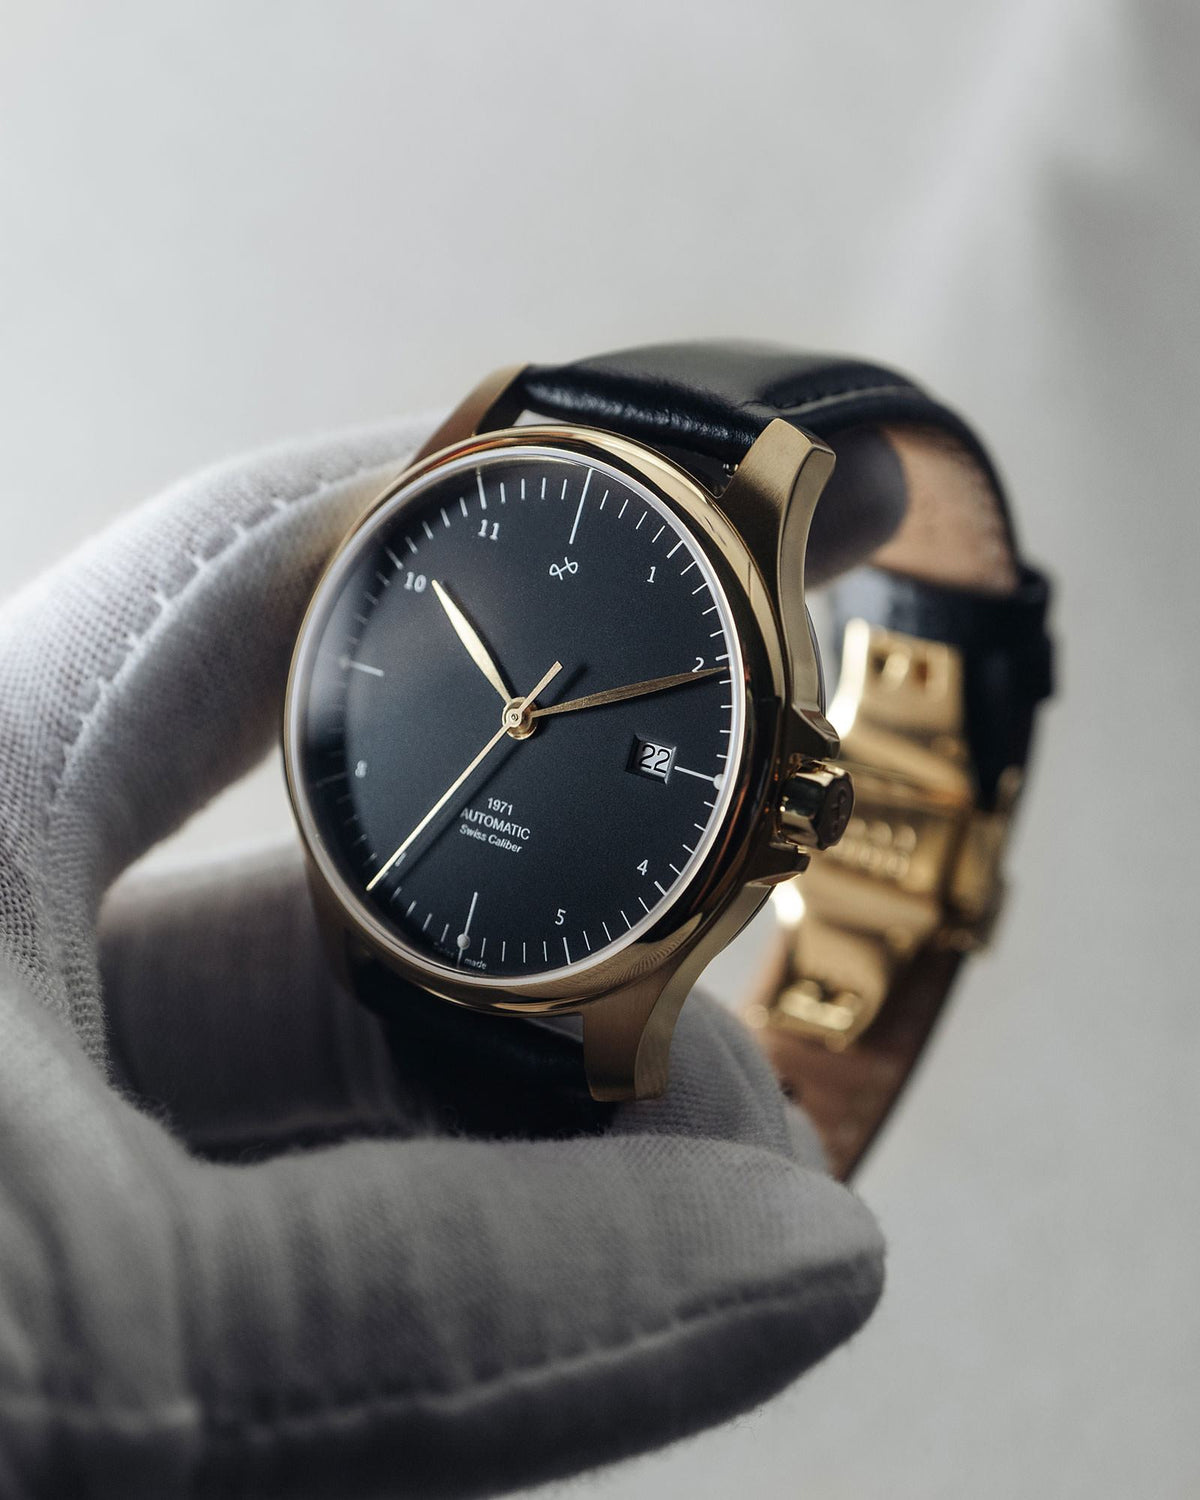 About Vintage - 1971 Automatic, Gold / Black - Swiss Made #Strap_Black